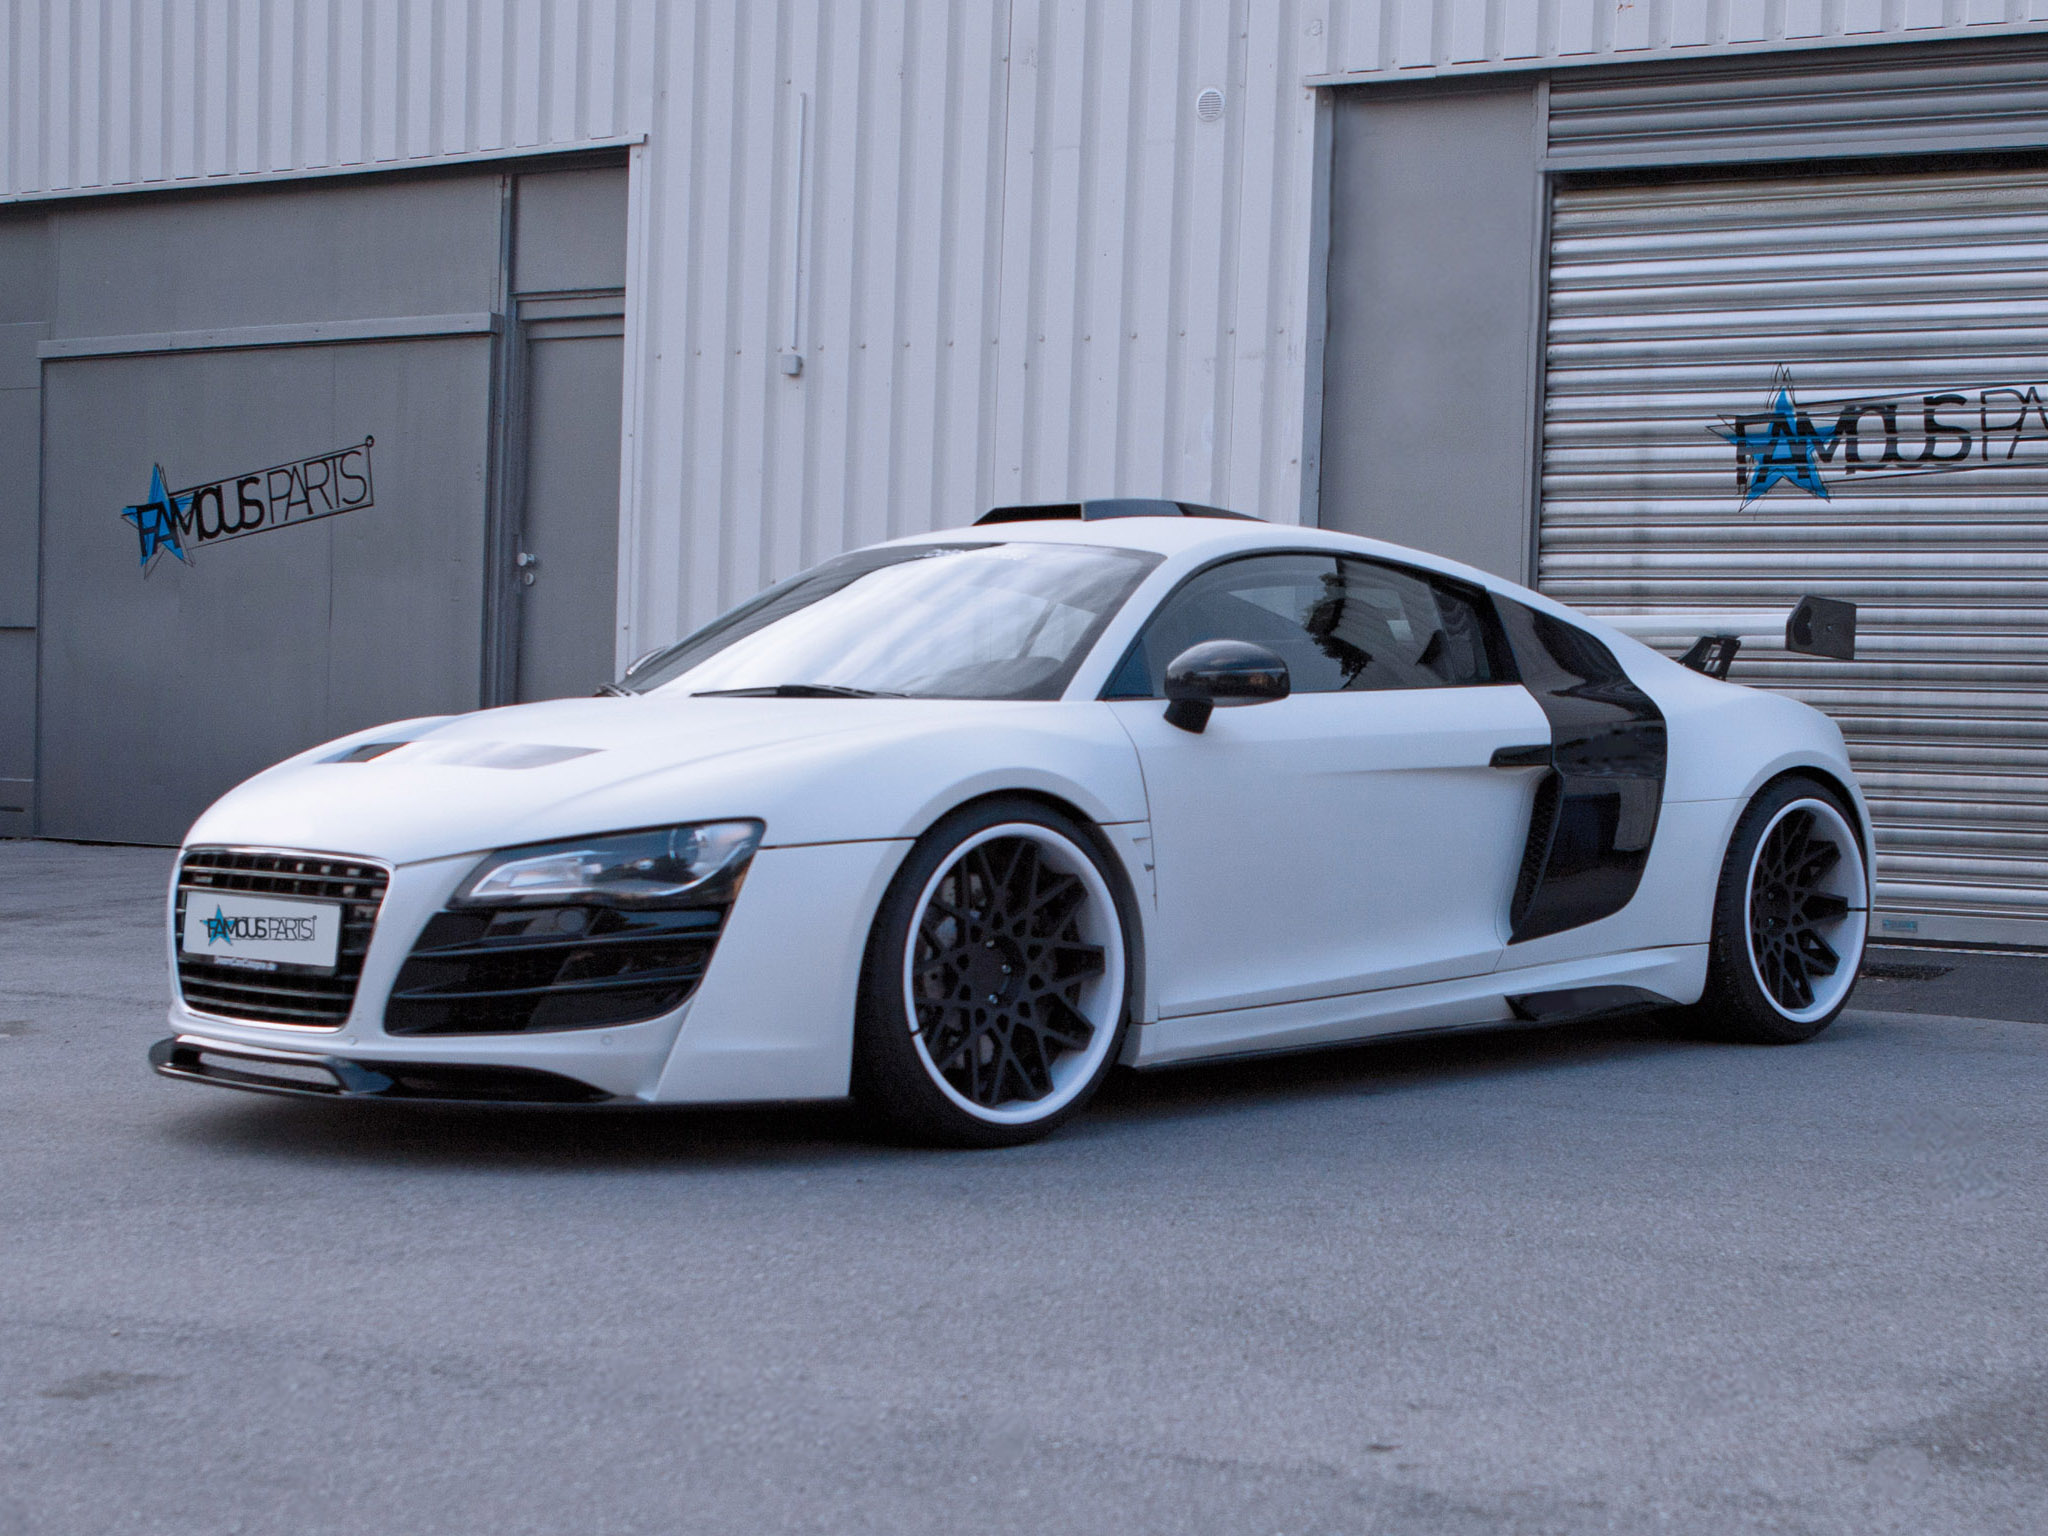 2013, Audi, R8, Gt, Wide, Body, Pd 850, Supercar, Supercars, Tuning, G t, R 8, Ff Wallpaper